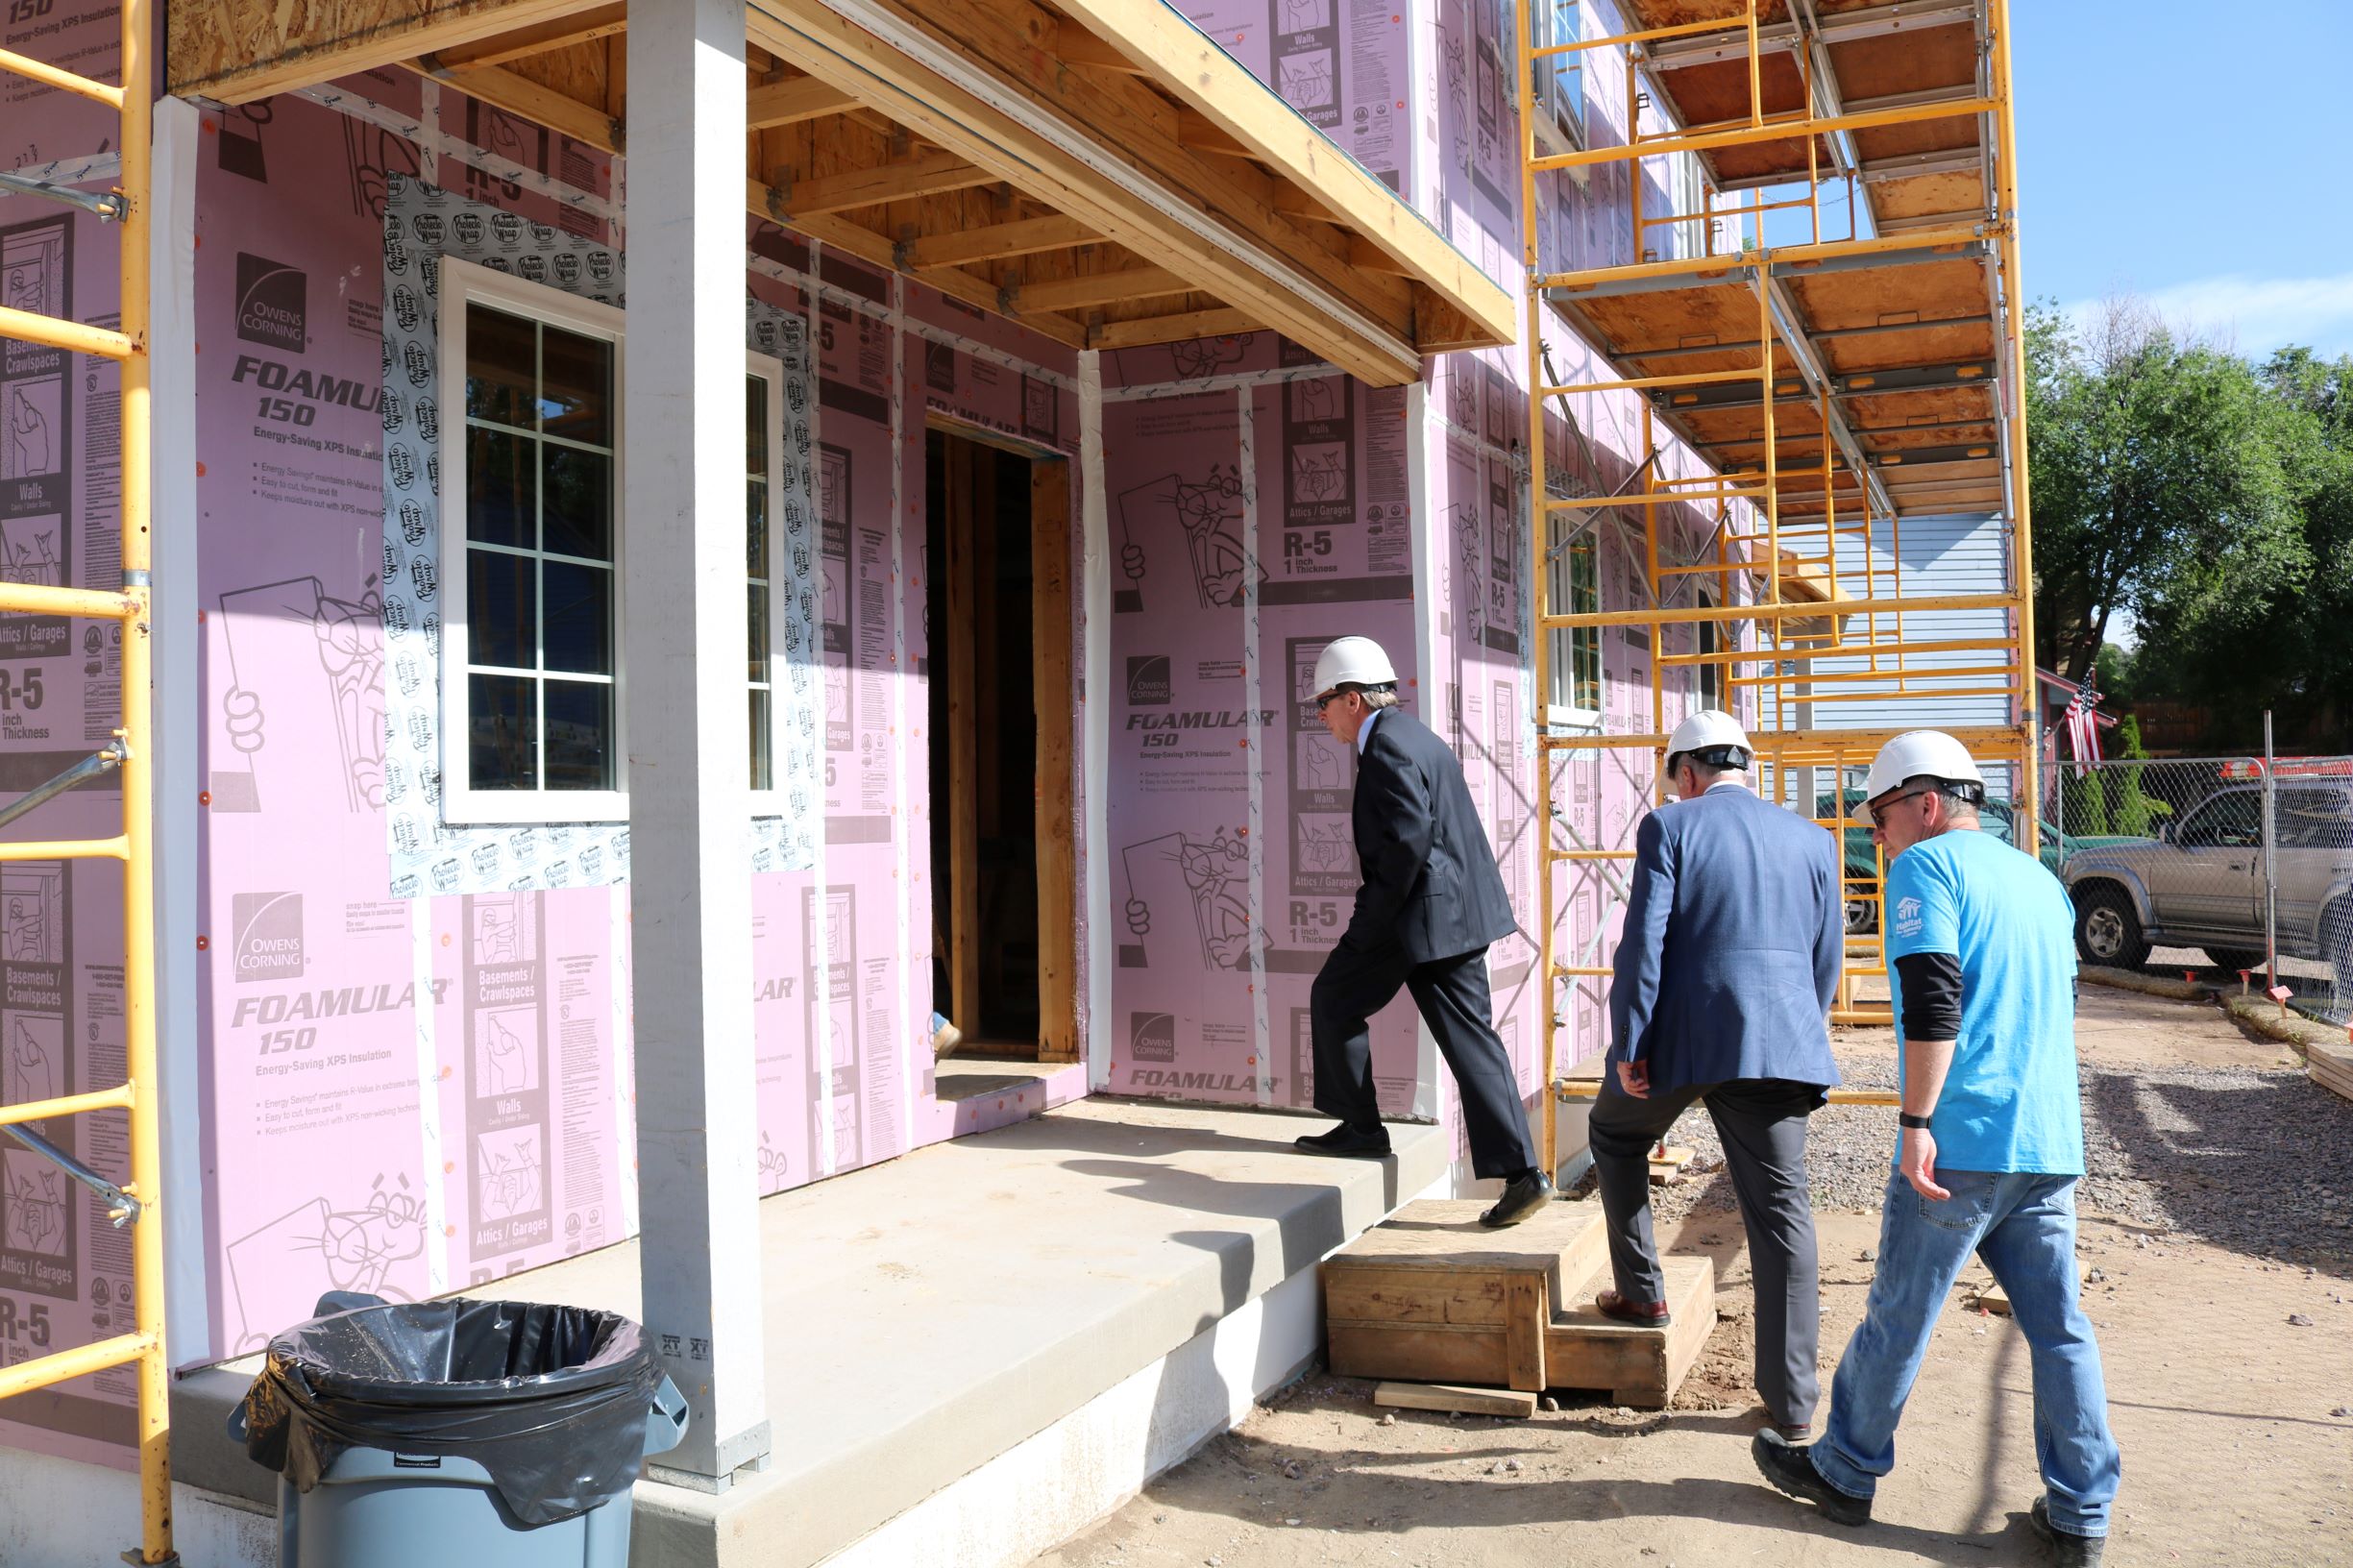 Mayor Suthers; Steve Posey, Community Development Division Manager for the City of COS; and Greg Kovach, Director of Operations at Pikes Peak Habitat, enter a current build.